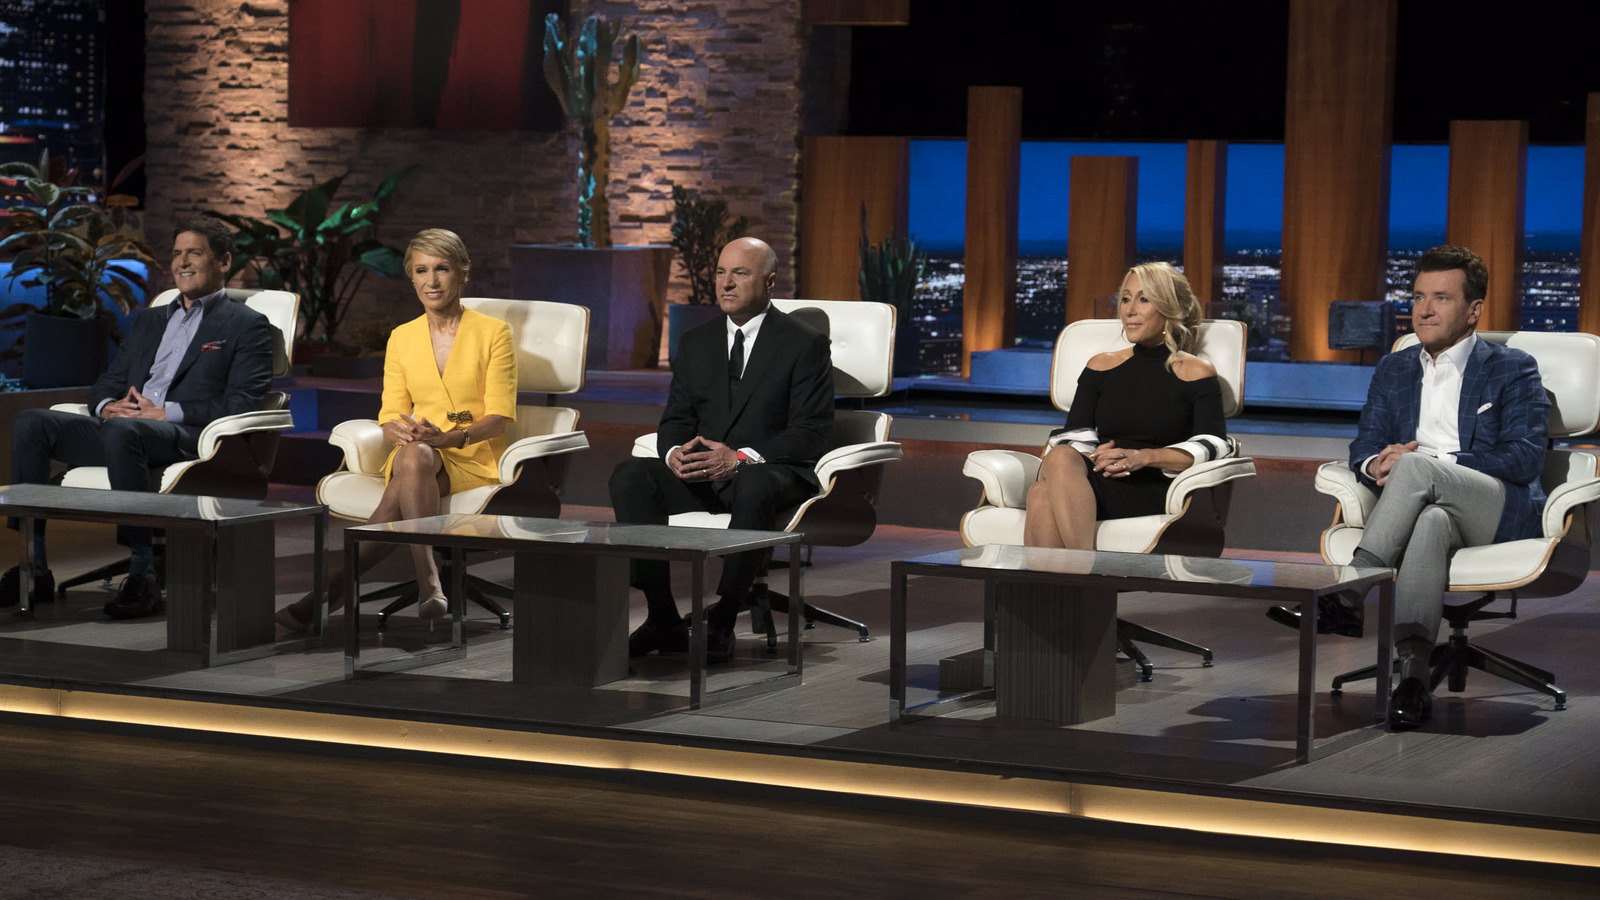 What Happened To Slate After Shark Tank?